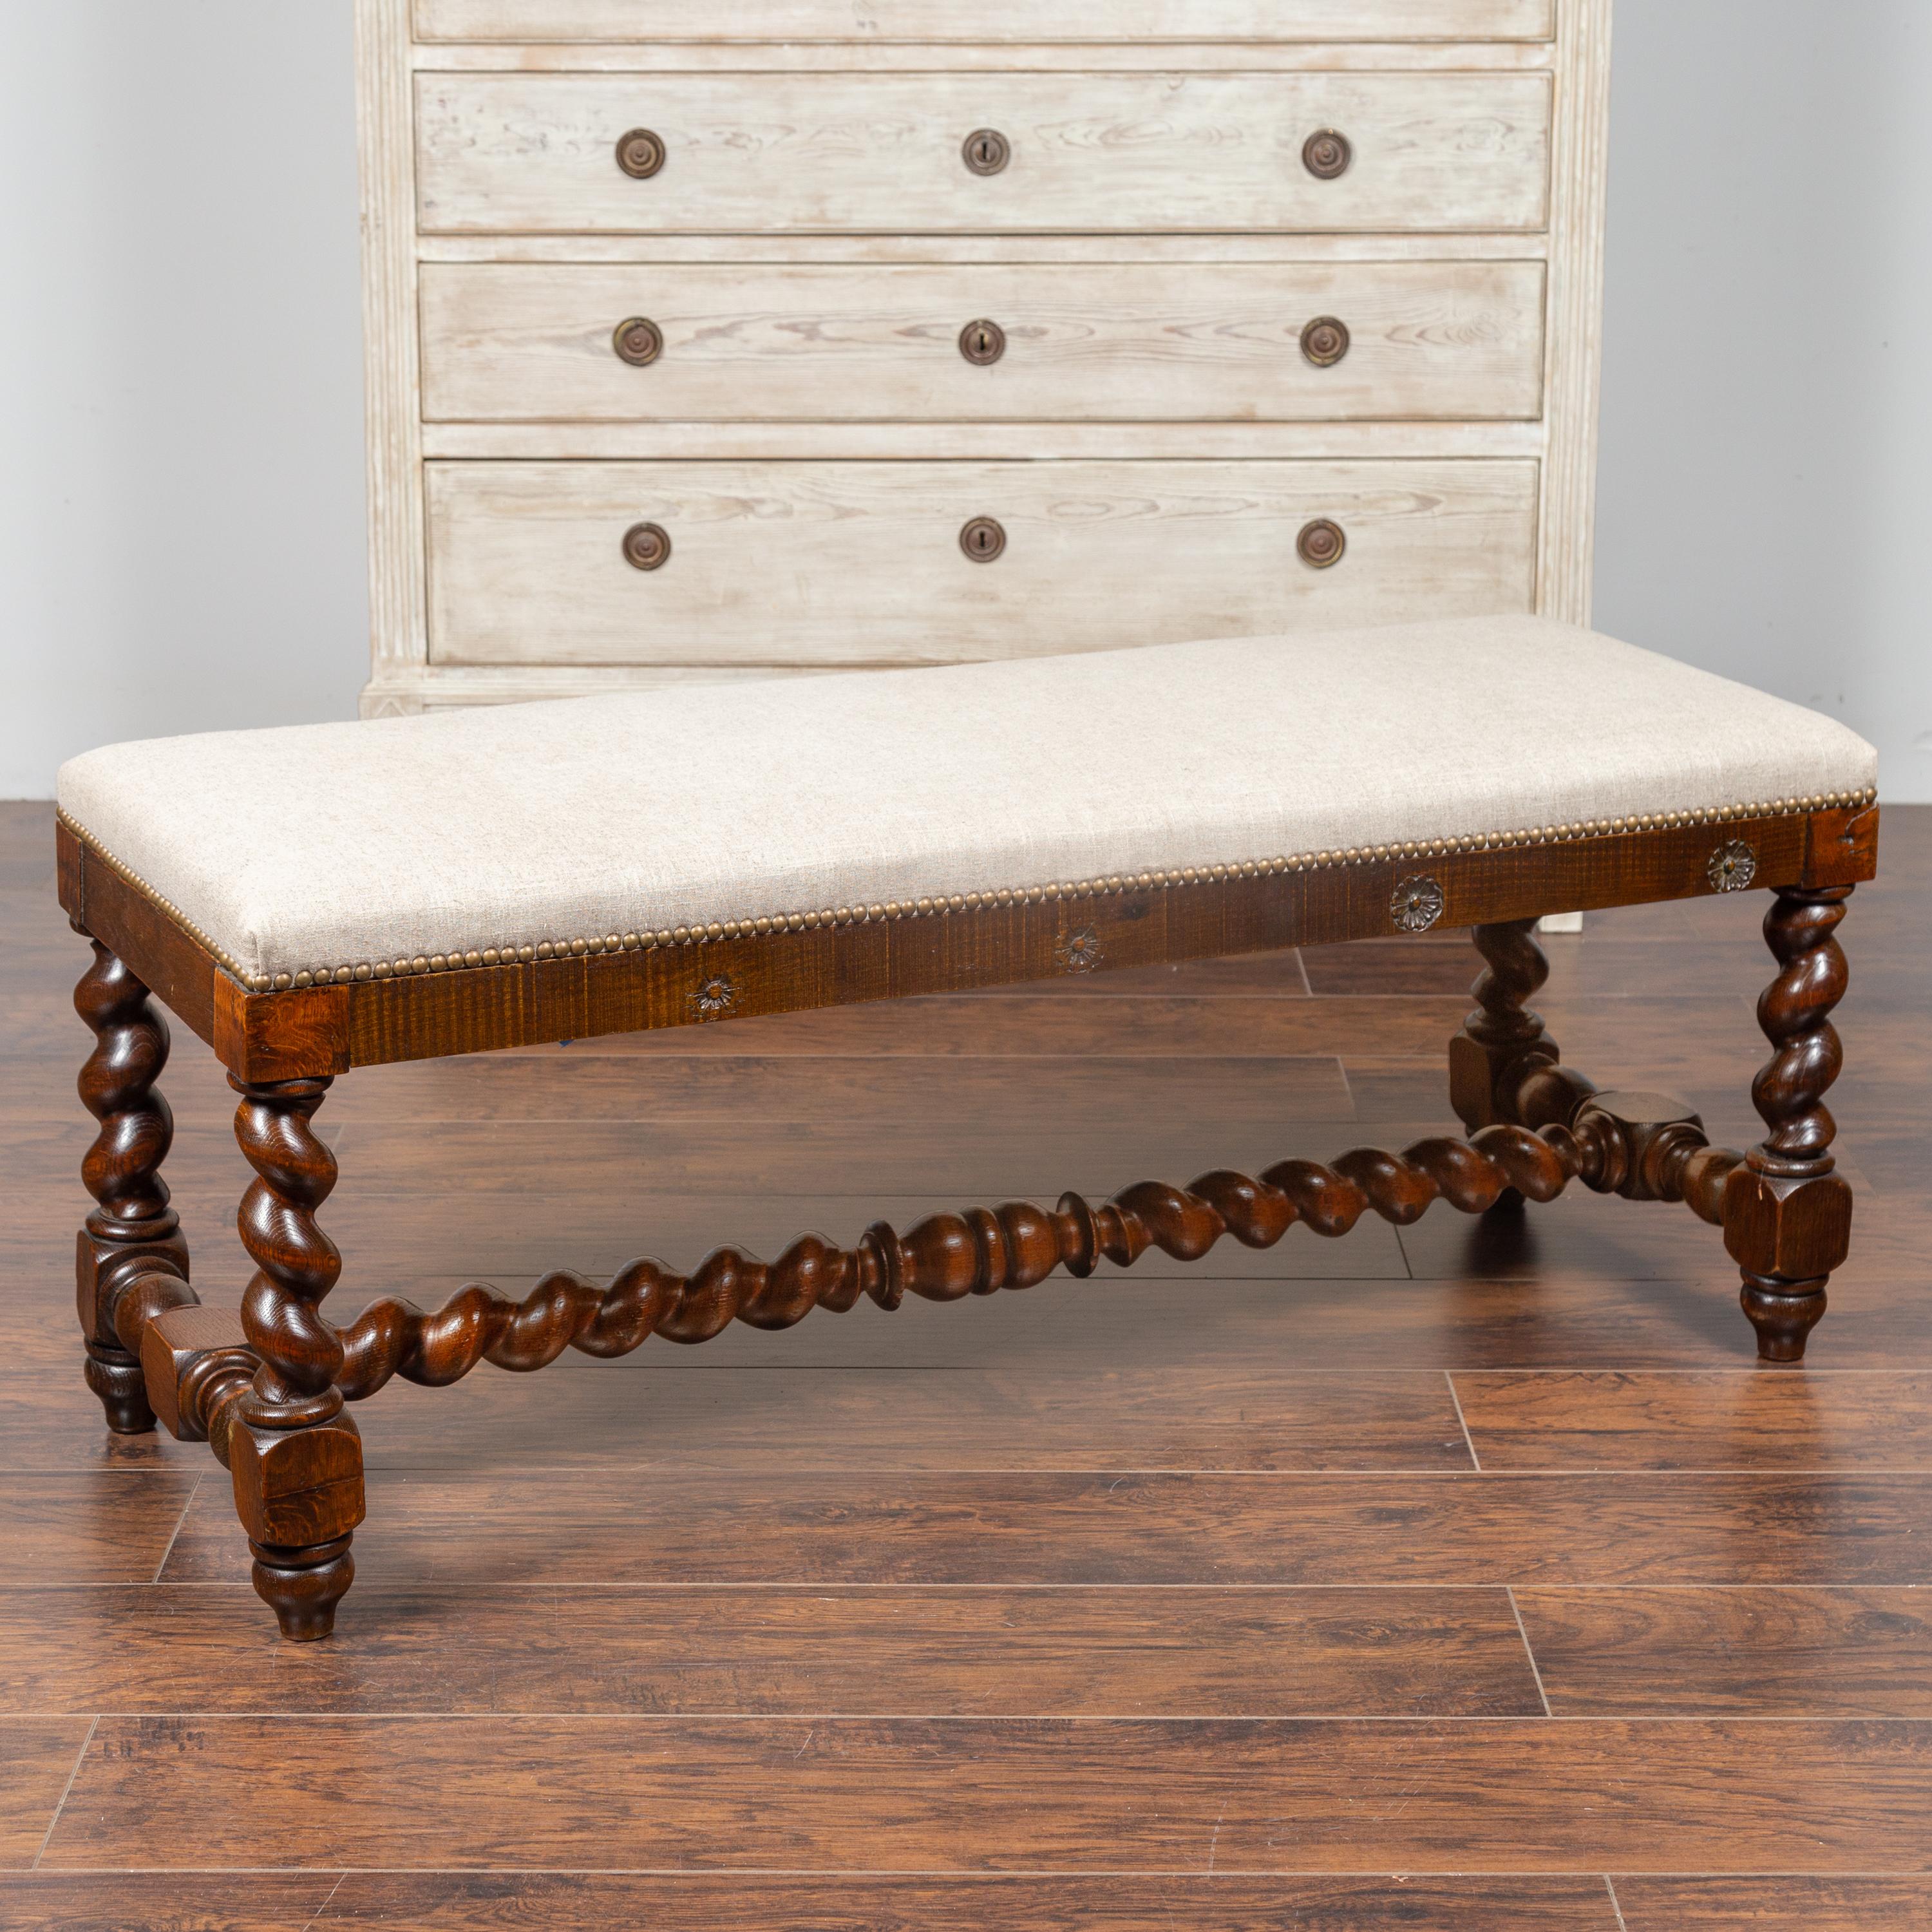 A French Louis XIII style walnut barley twist bench from the late 19th century with new upholstery. Born in the last quarter of the 19th century, this stylish walnut bench features a rectangular seat newly reupholstered with a linen fabric accented